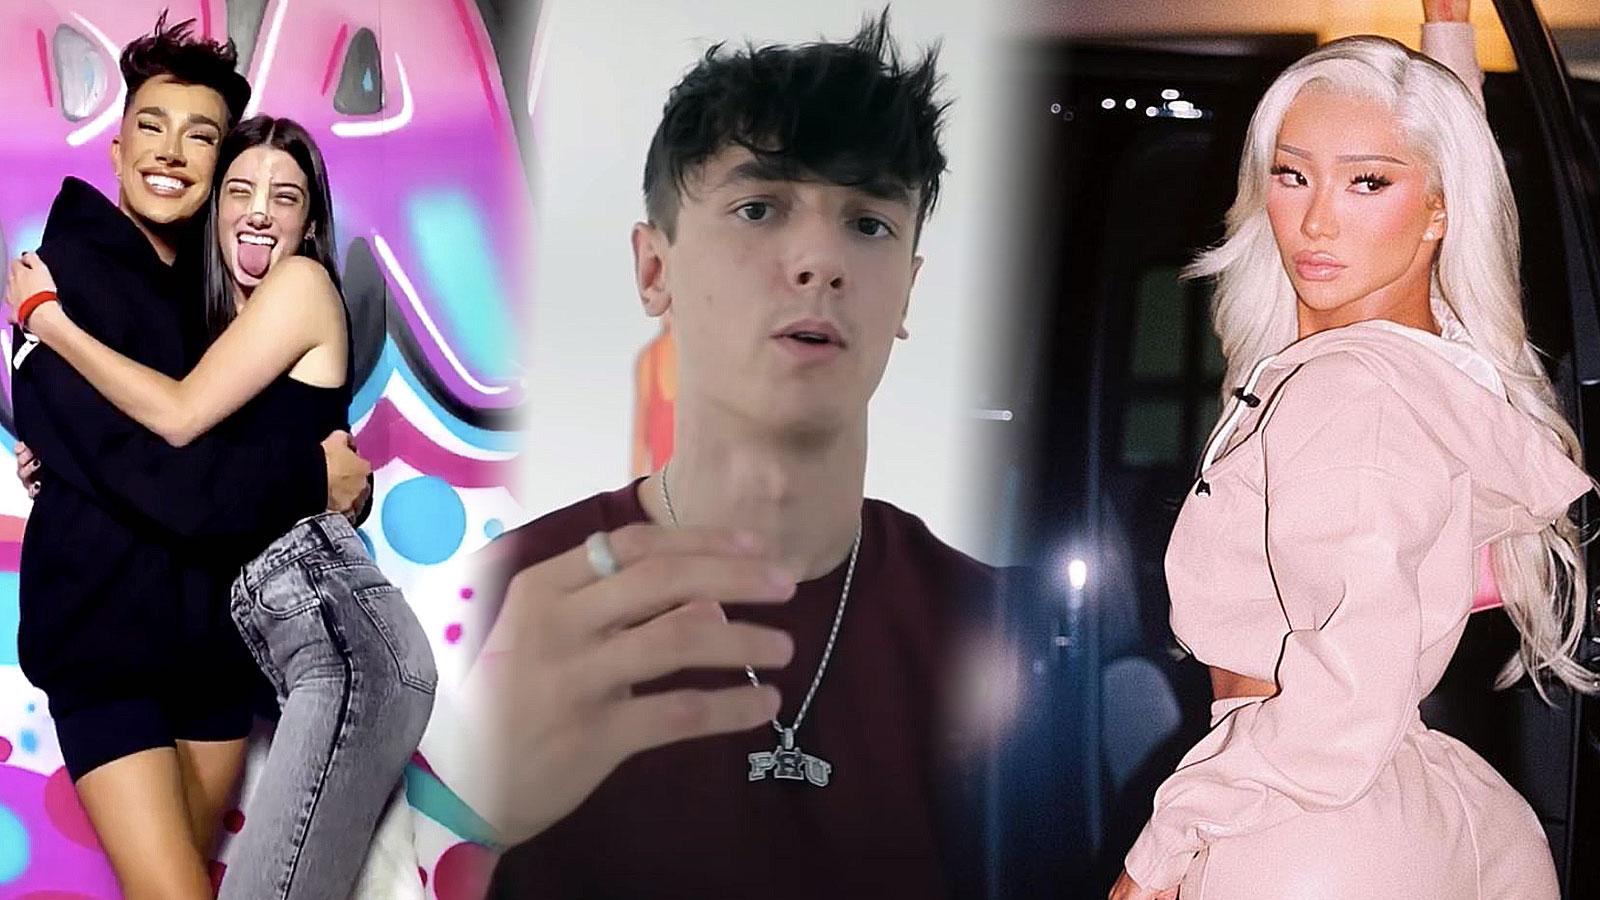 Photos of James Charles, Charli D'Amelio, Bryce Hall and Nikita Dragun are placed side by side.